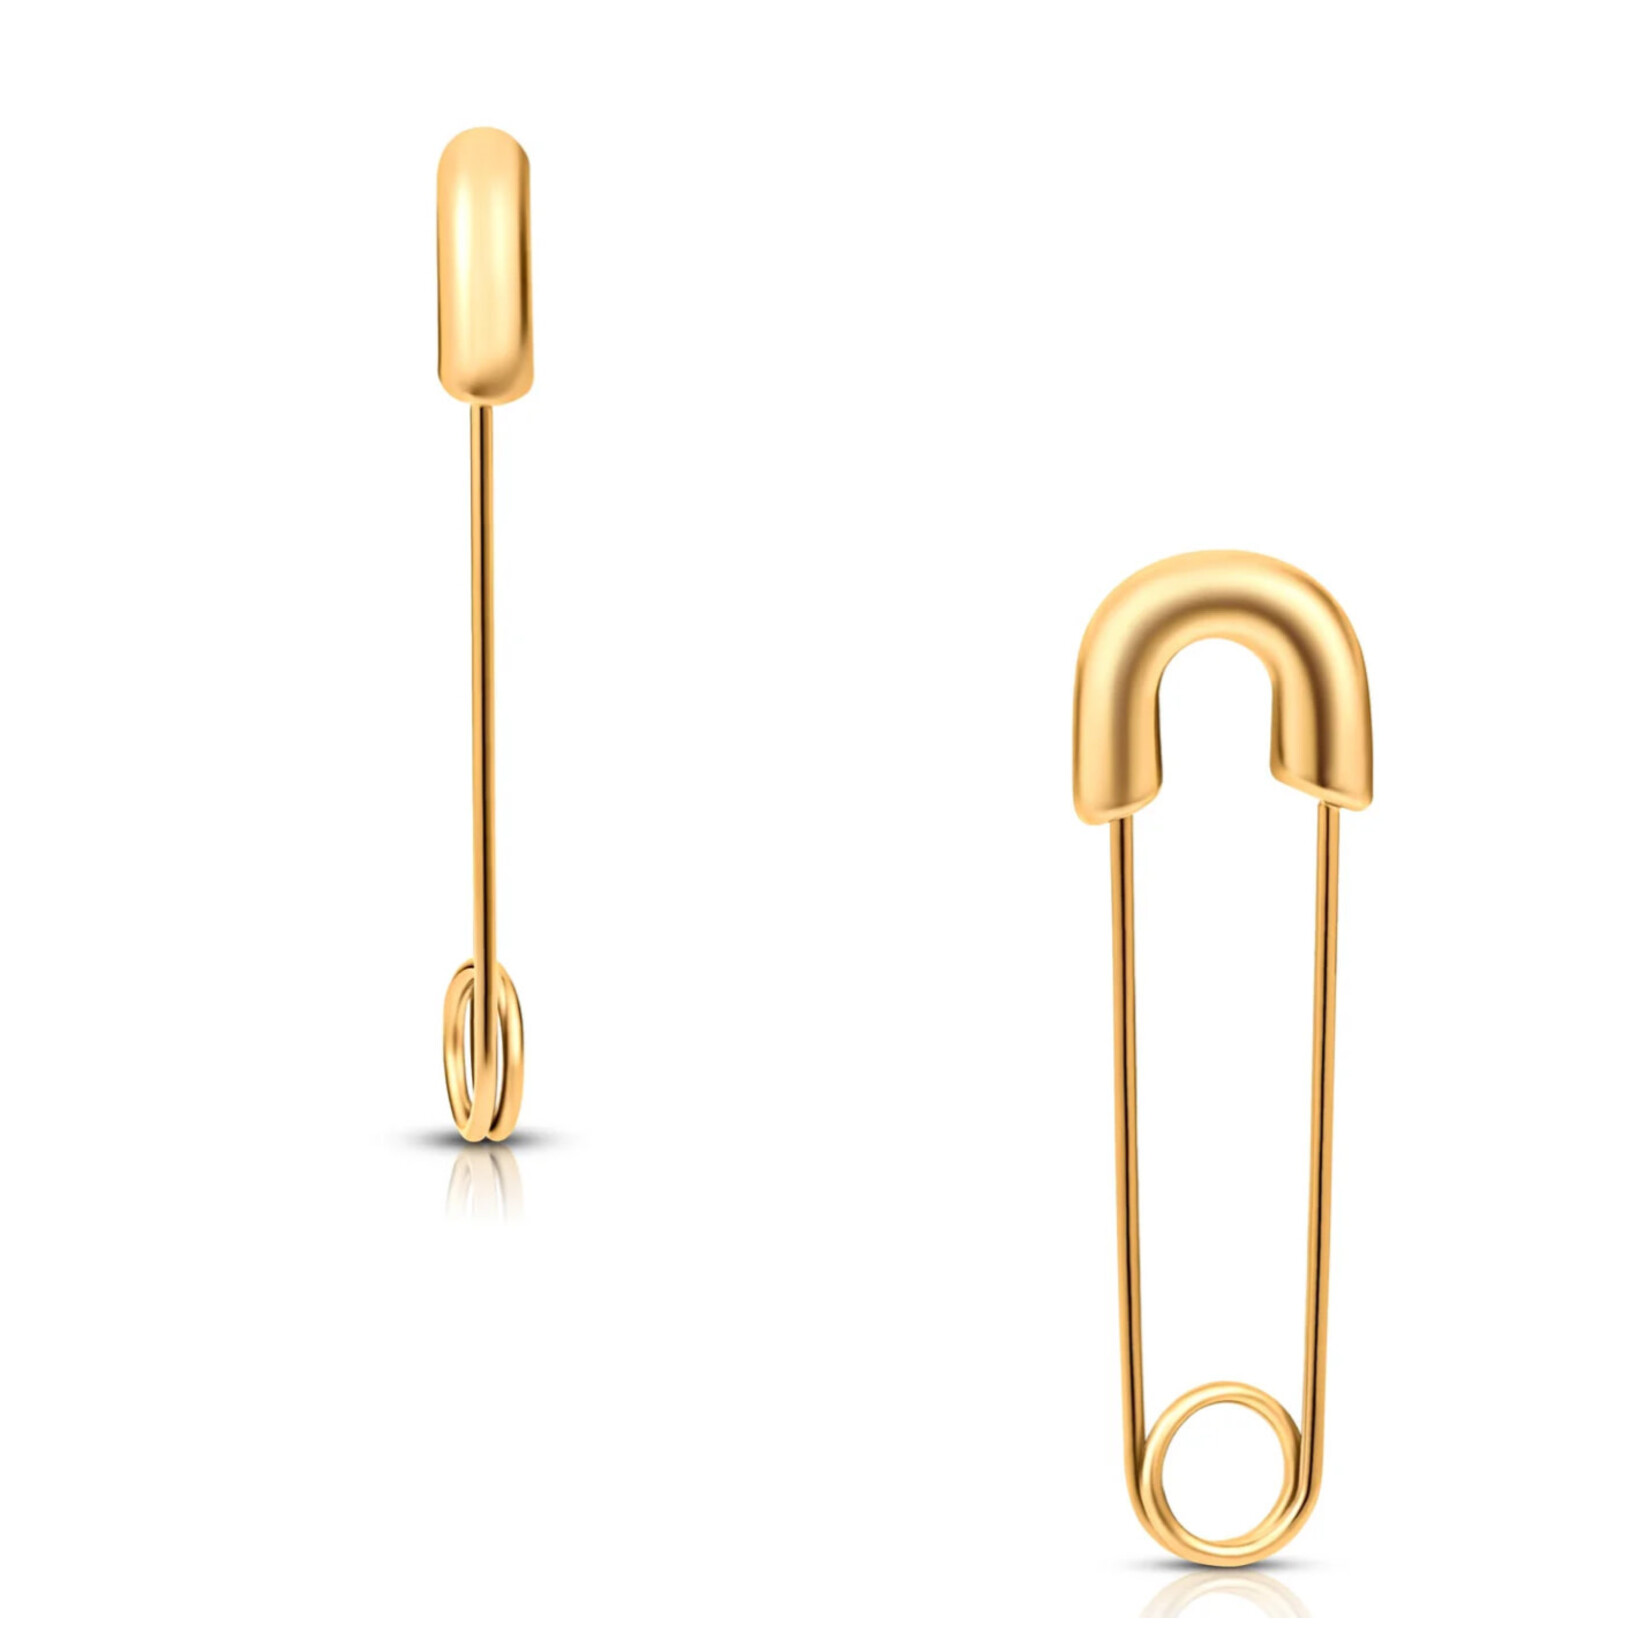 Ellie Vail Abi safety pin earring